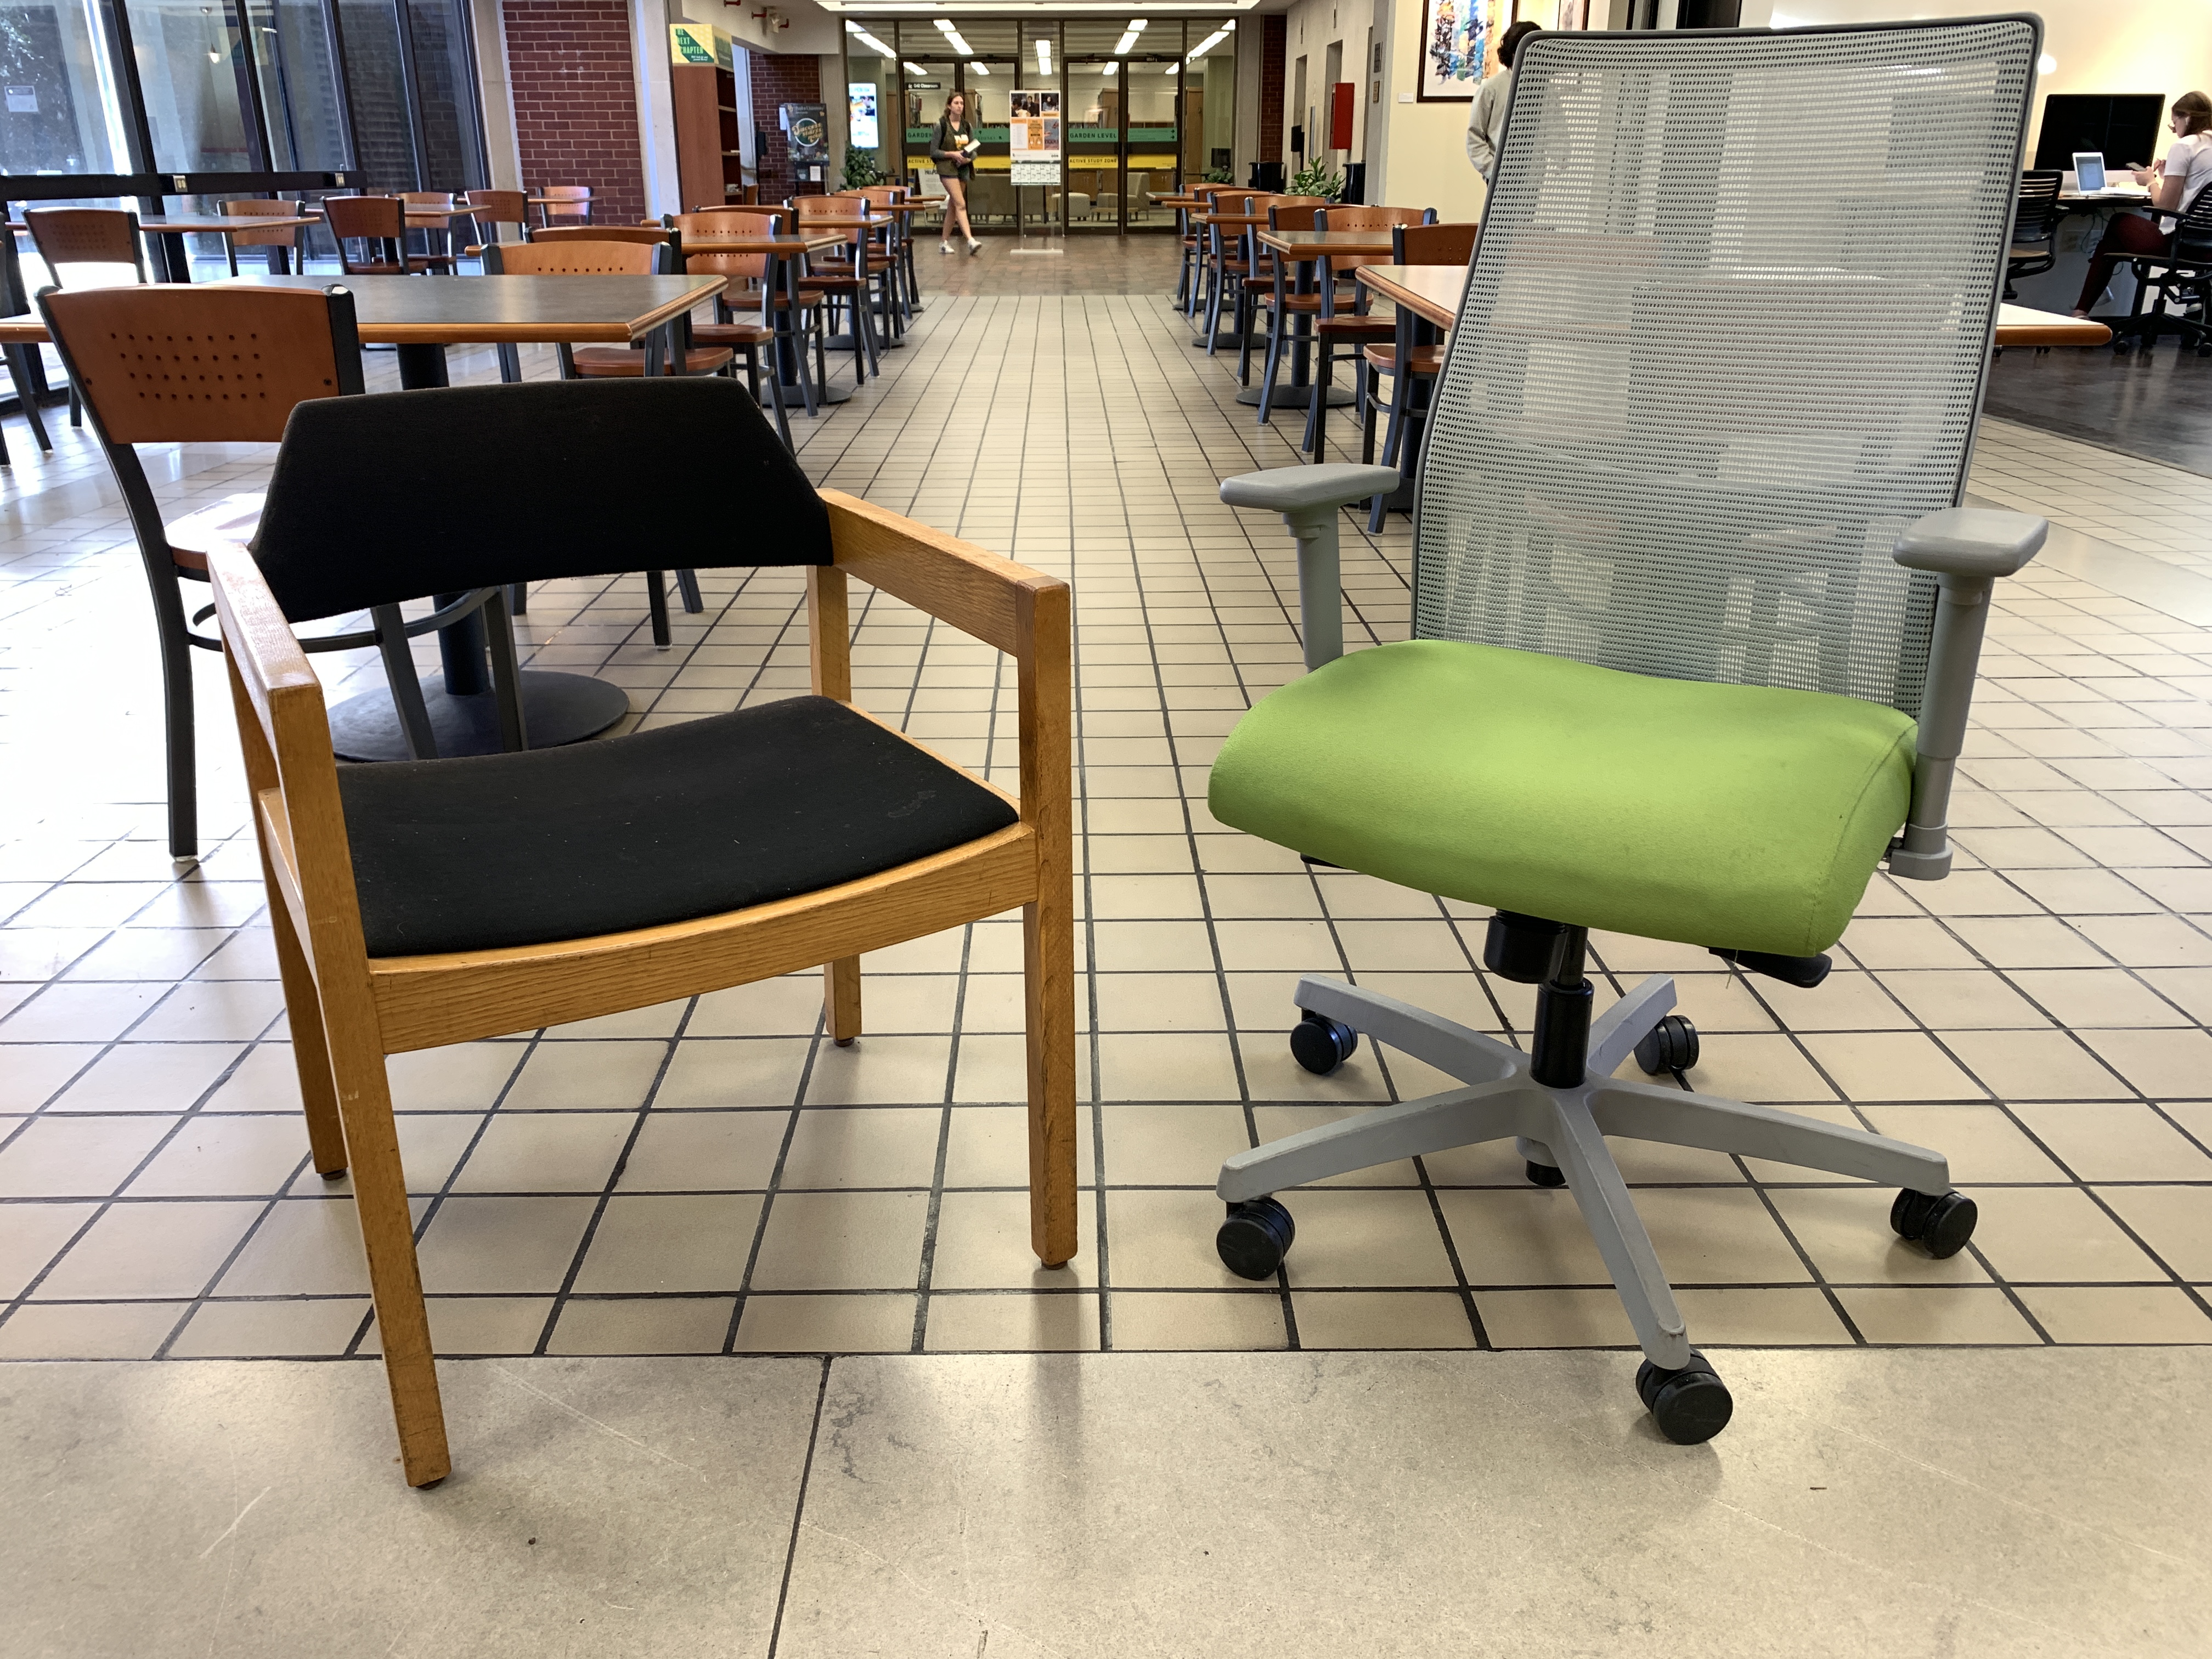 side by side comparison of chairs from 1968 to now